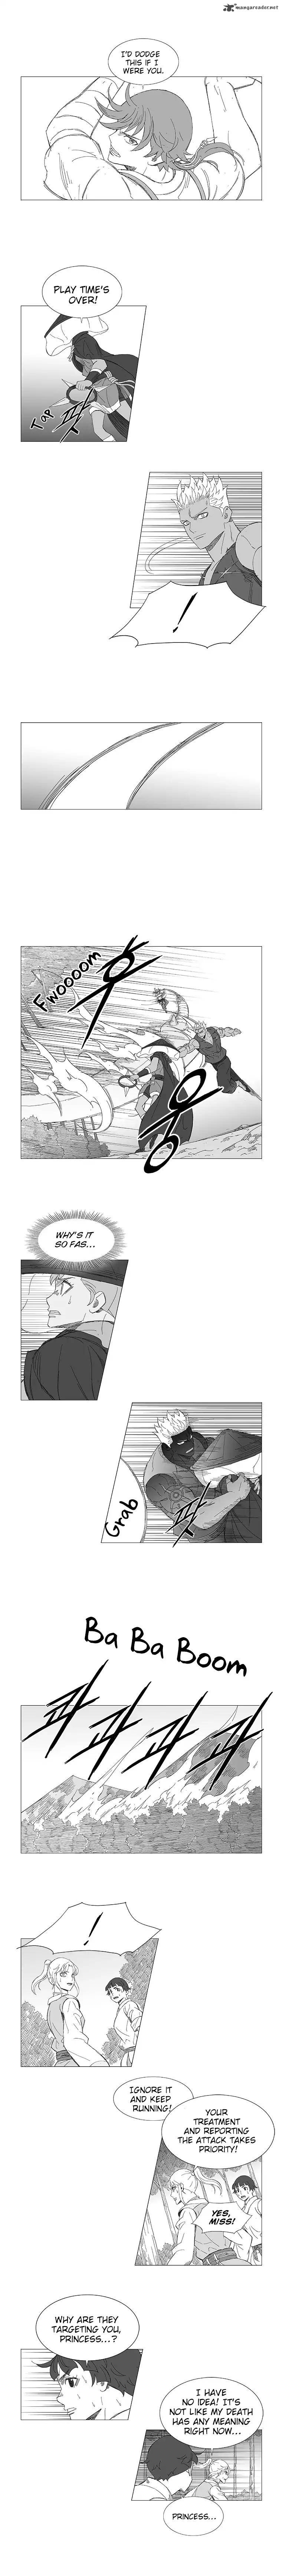 Wind Sword Chapter 6 Page 4